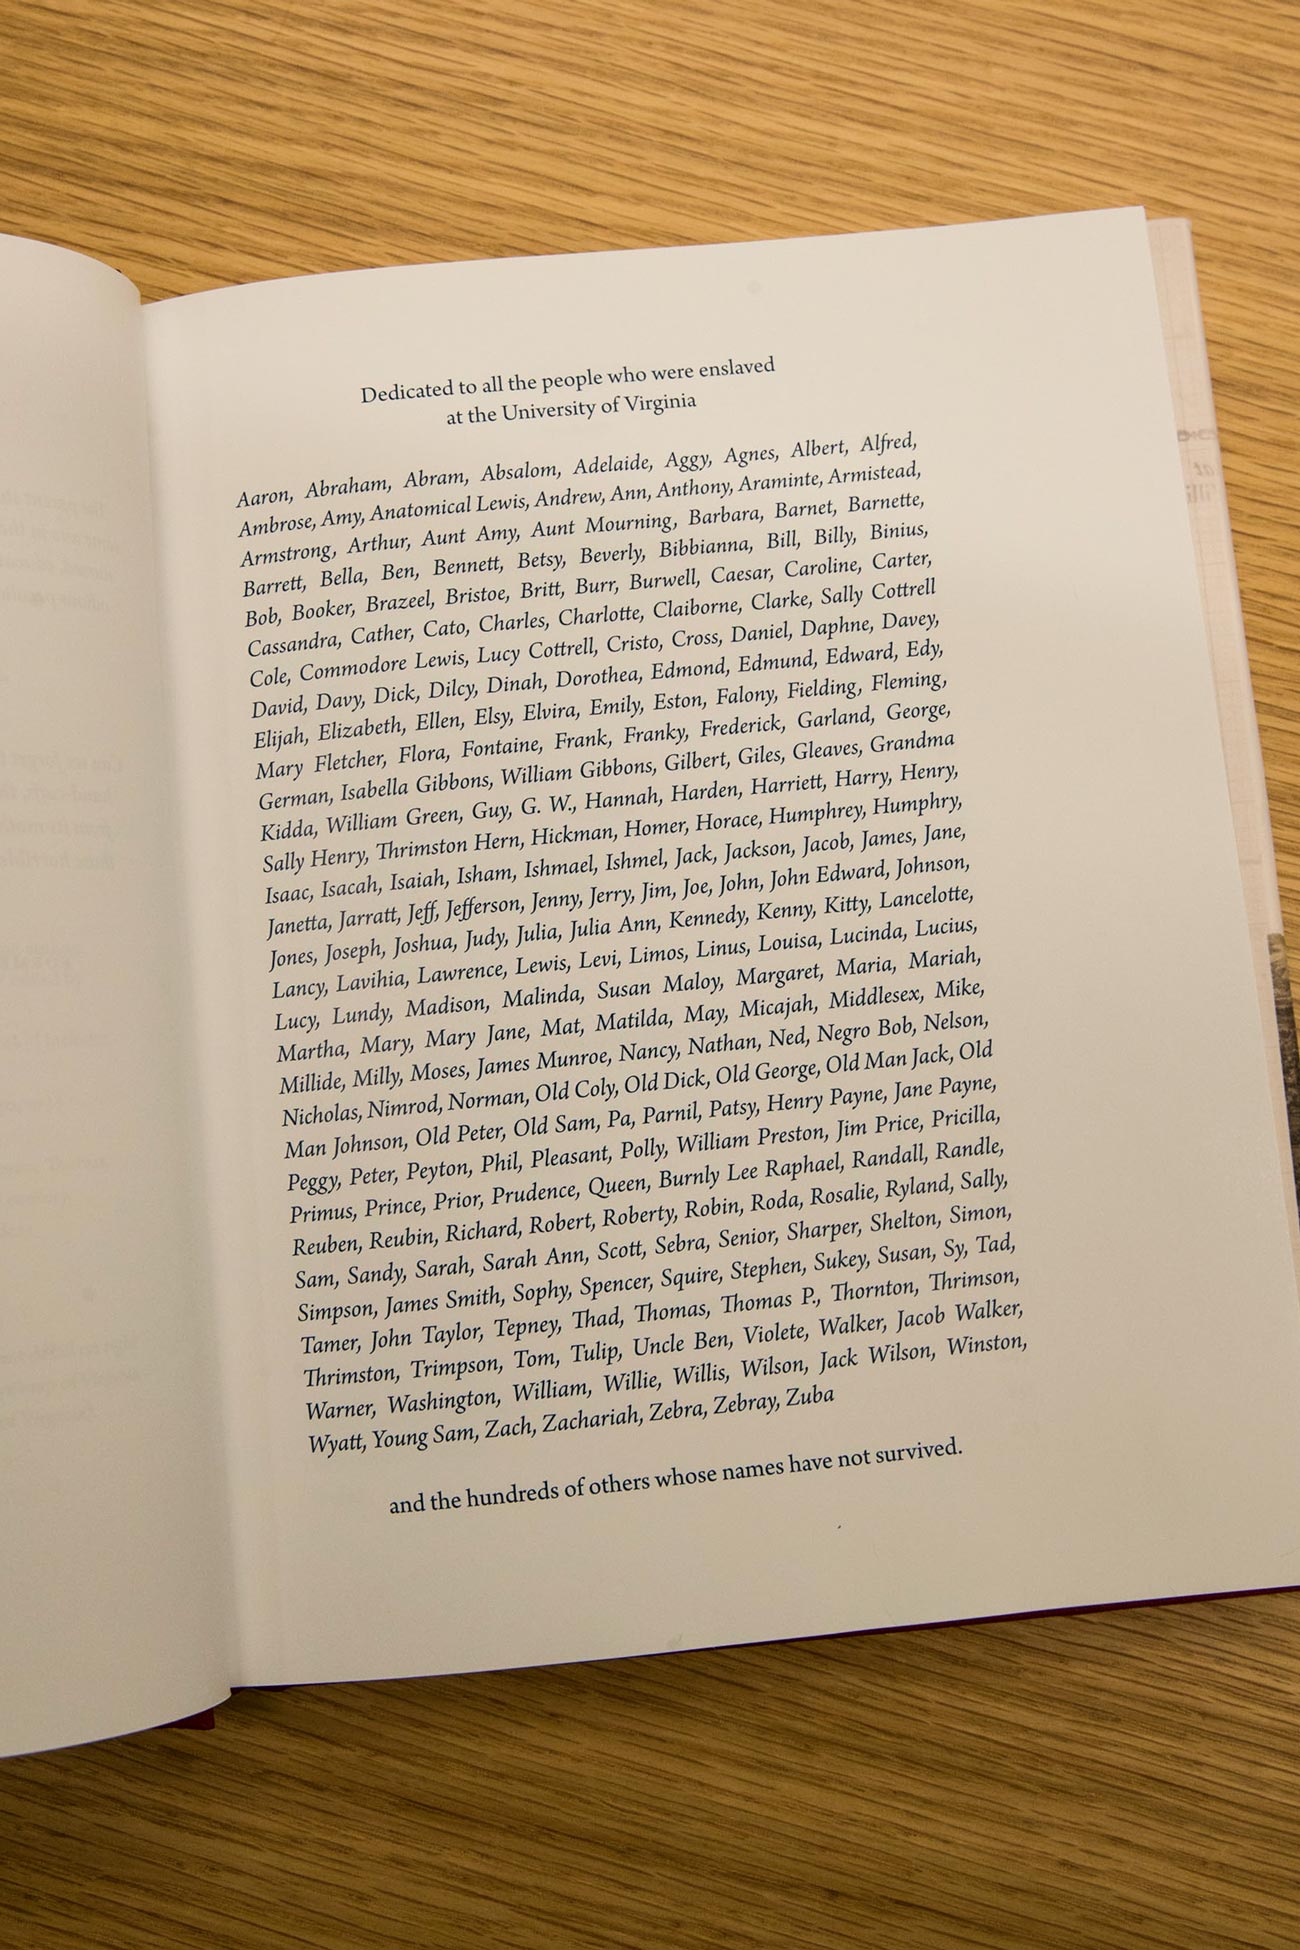 Books dedication page filled with names